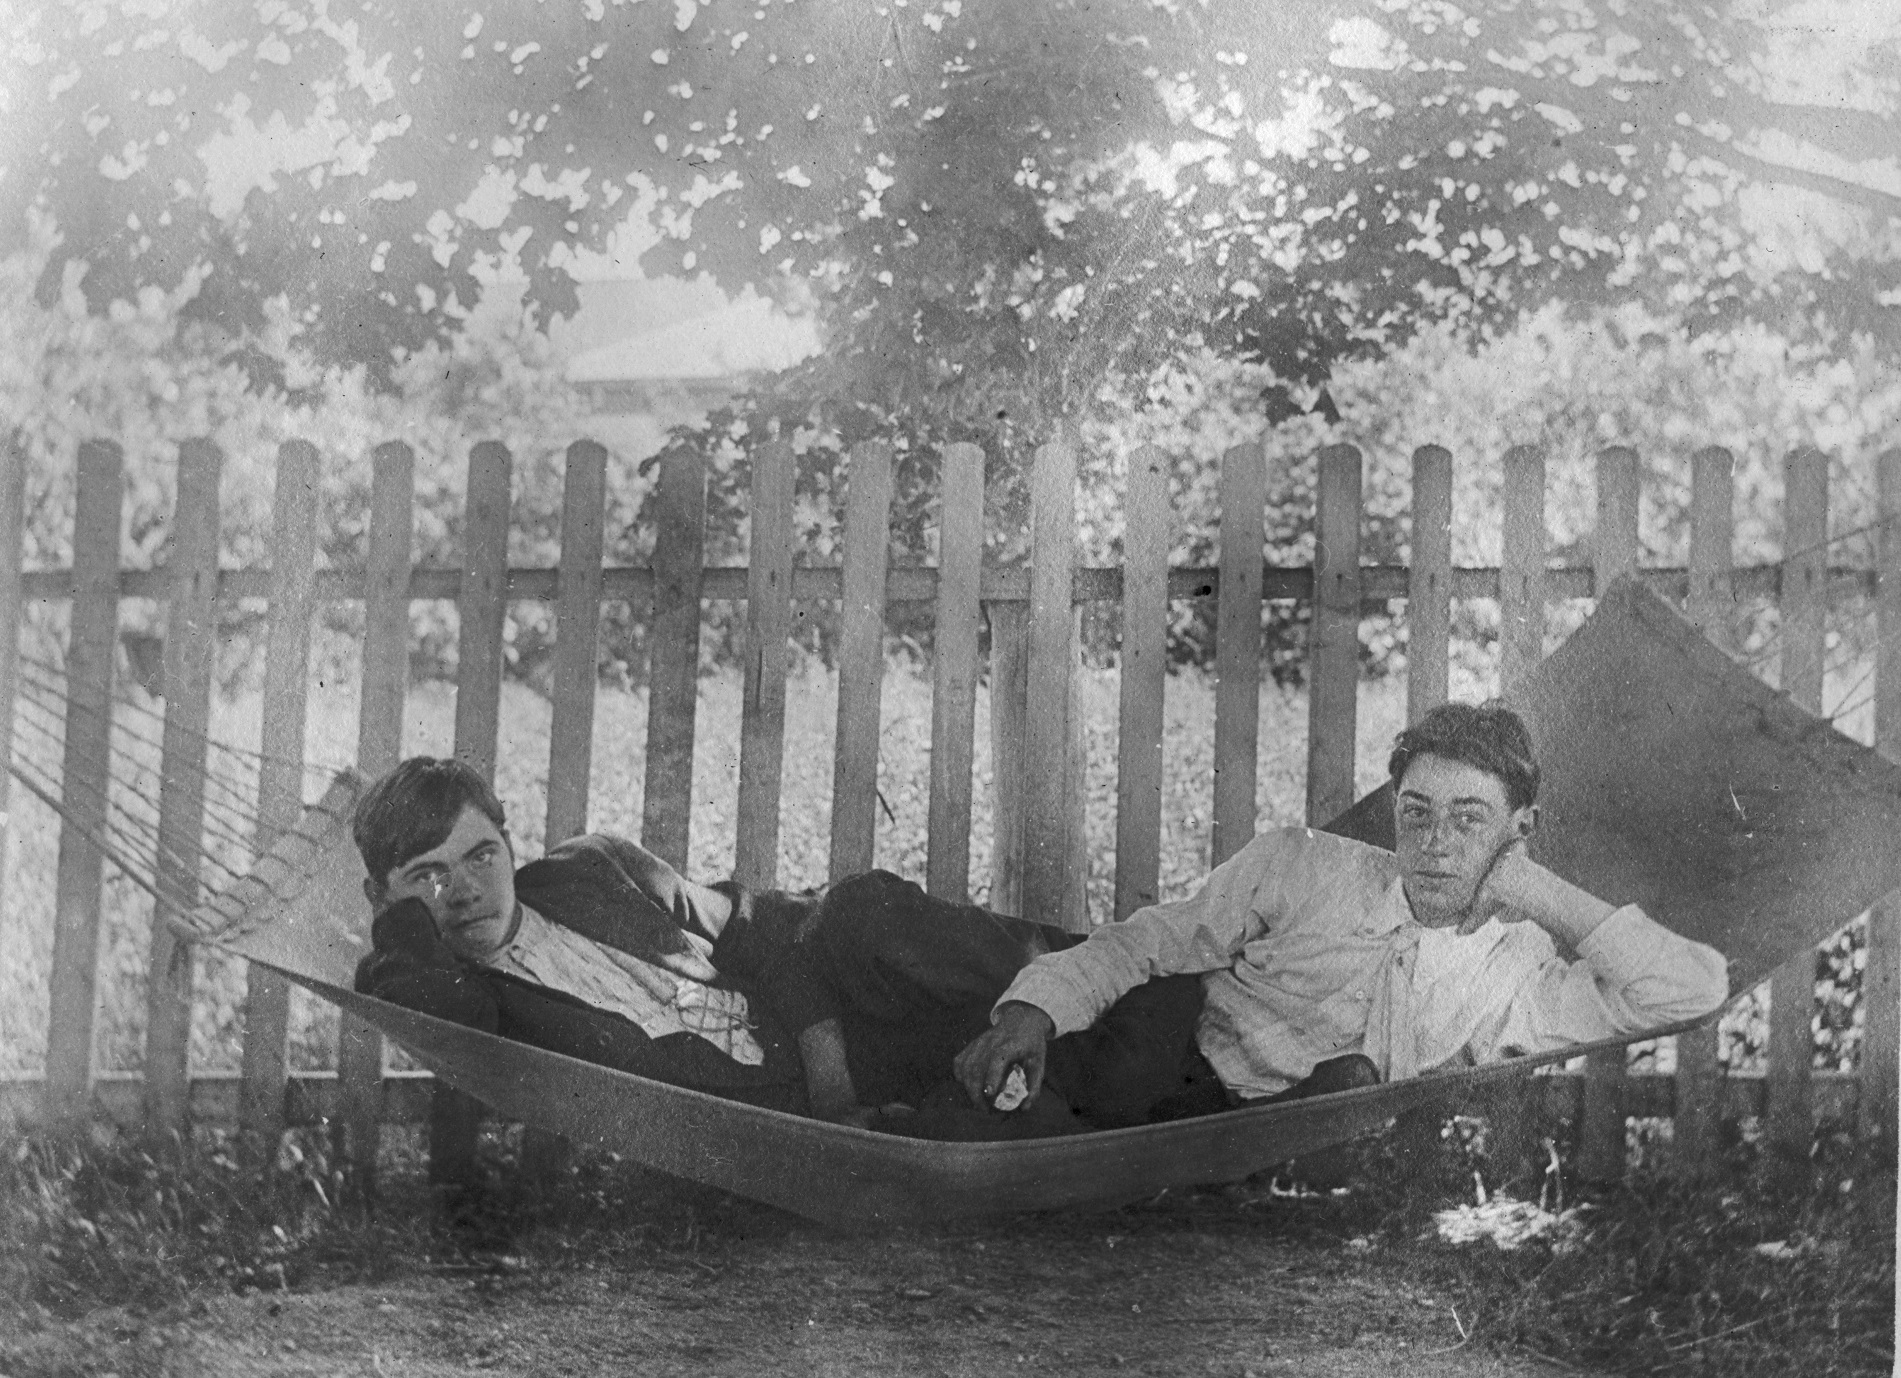 More than a century ago, rural queers were invisible